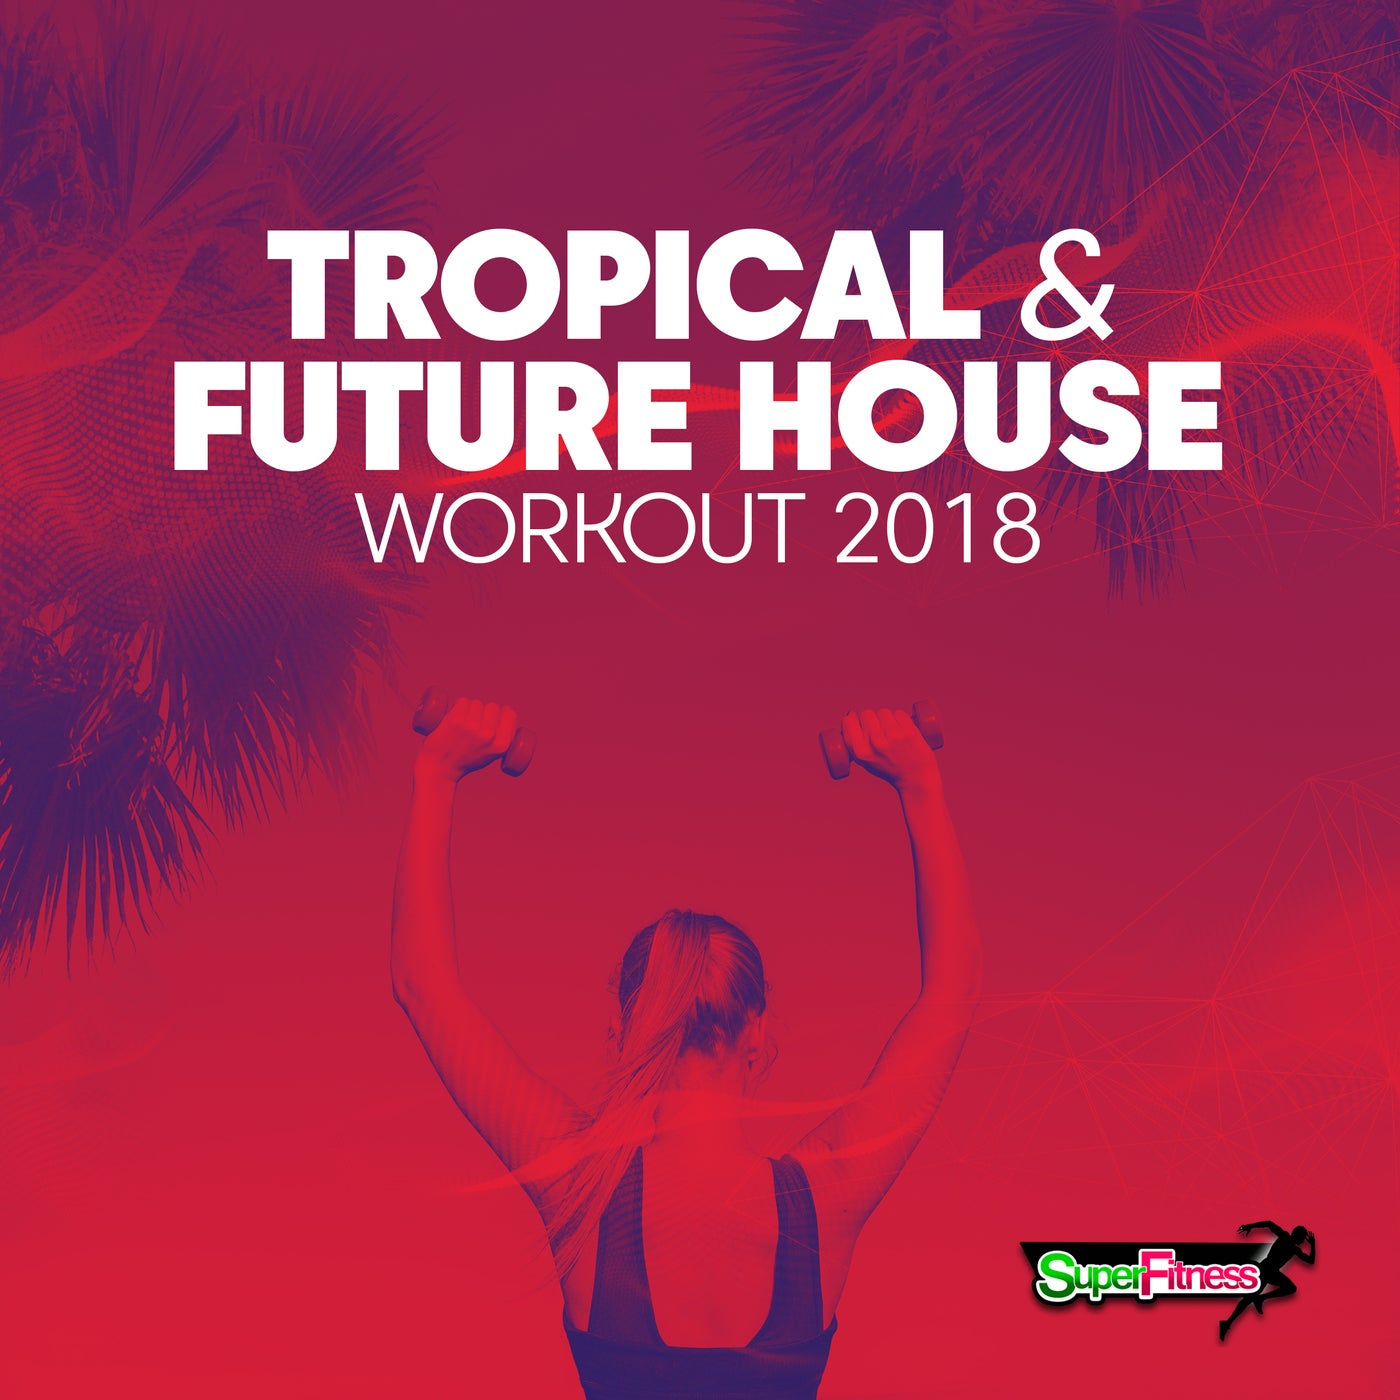 Tropical & Future House Workout 2018